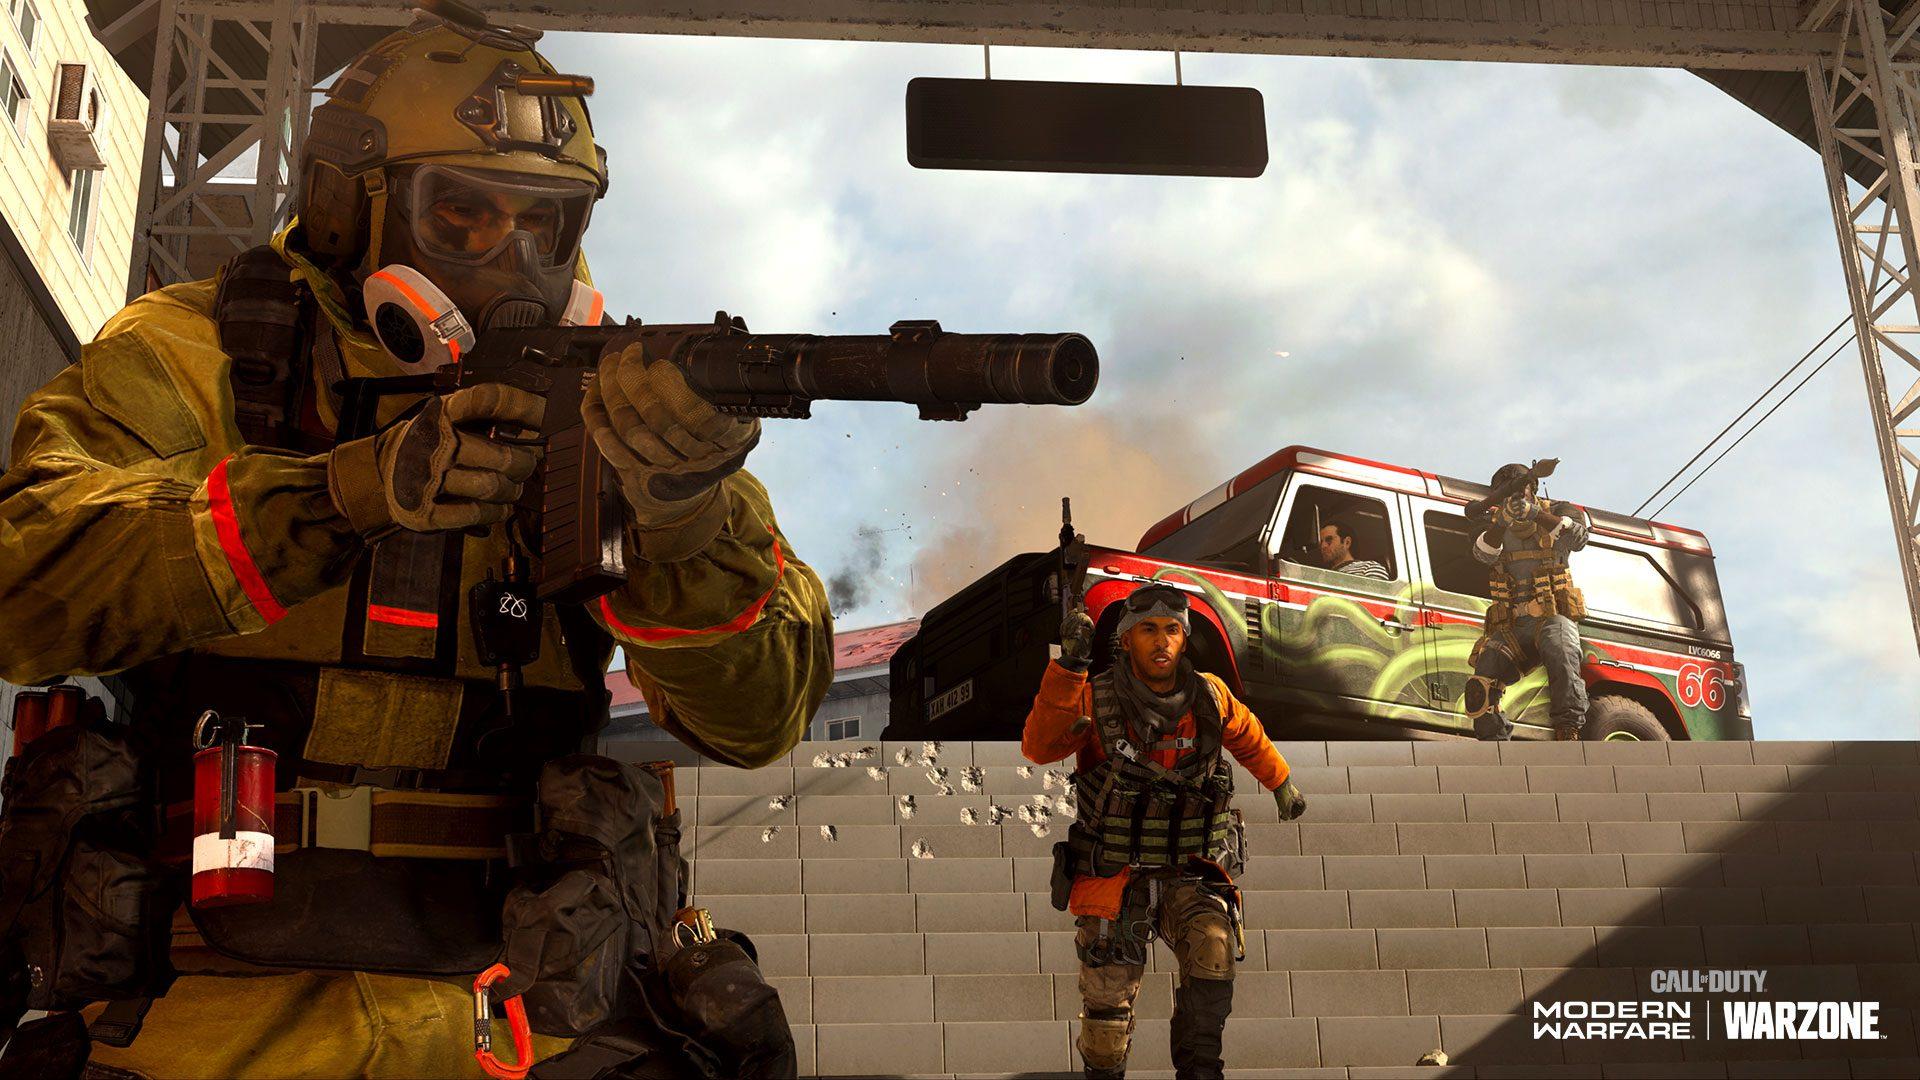 The release of the AS VAL in Season 6 marks the thirteenth assault rifle added to Modern Warfare.